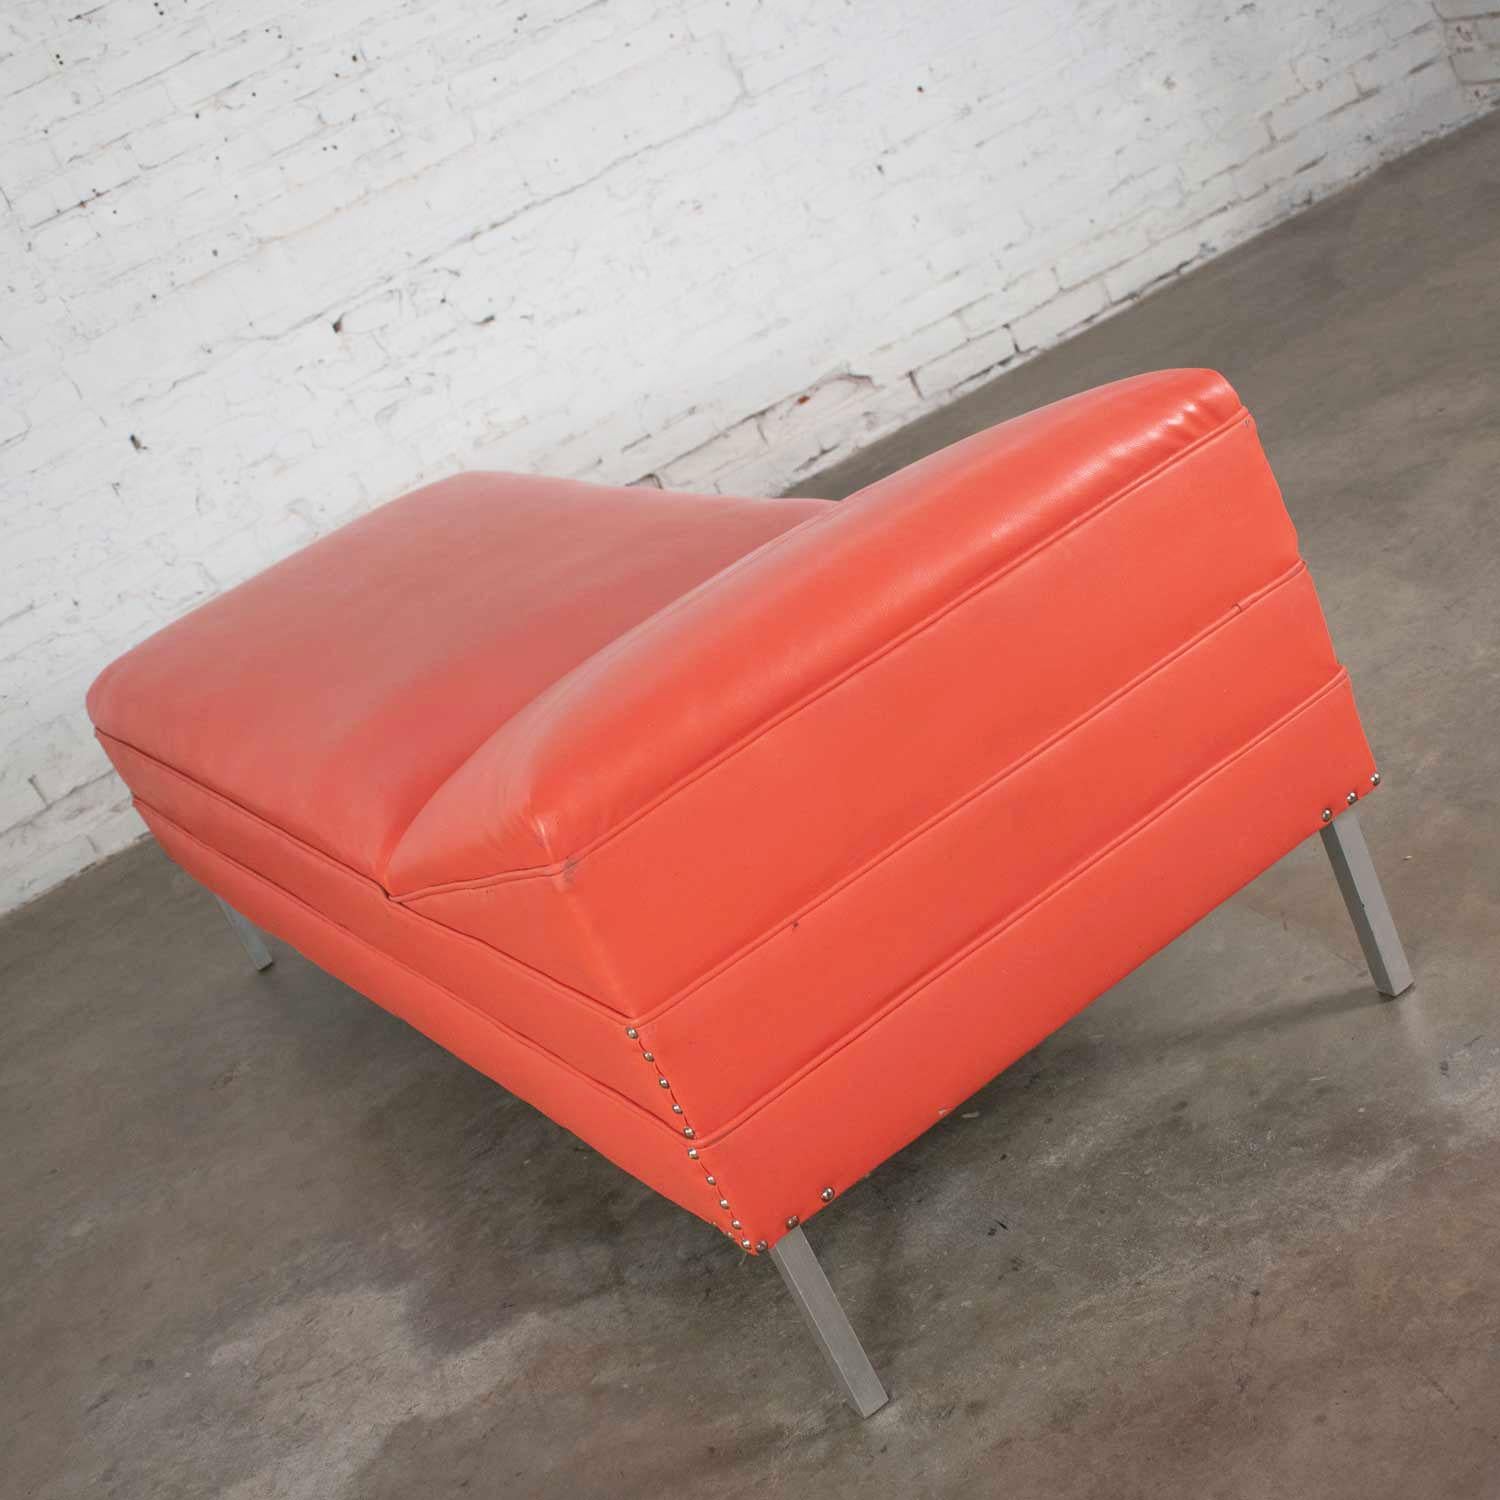 Mid-Century Modern Chaise or Day Bed in Coral Vinyl Faux Leather Aluminum Legs For Sale 2